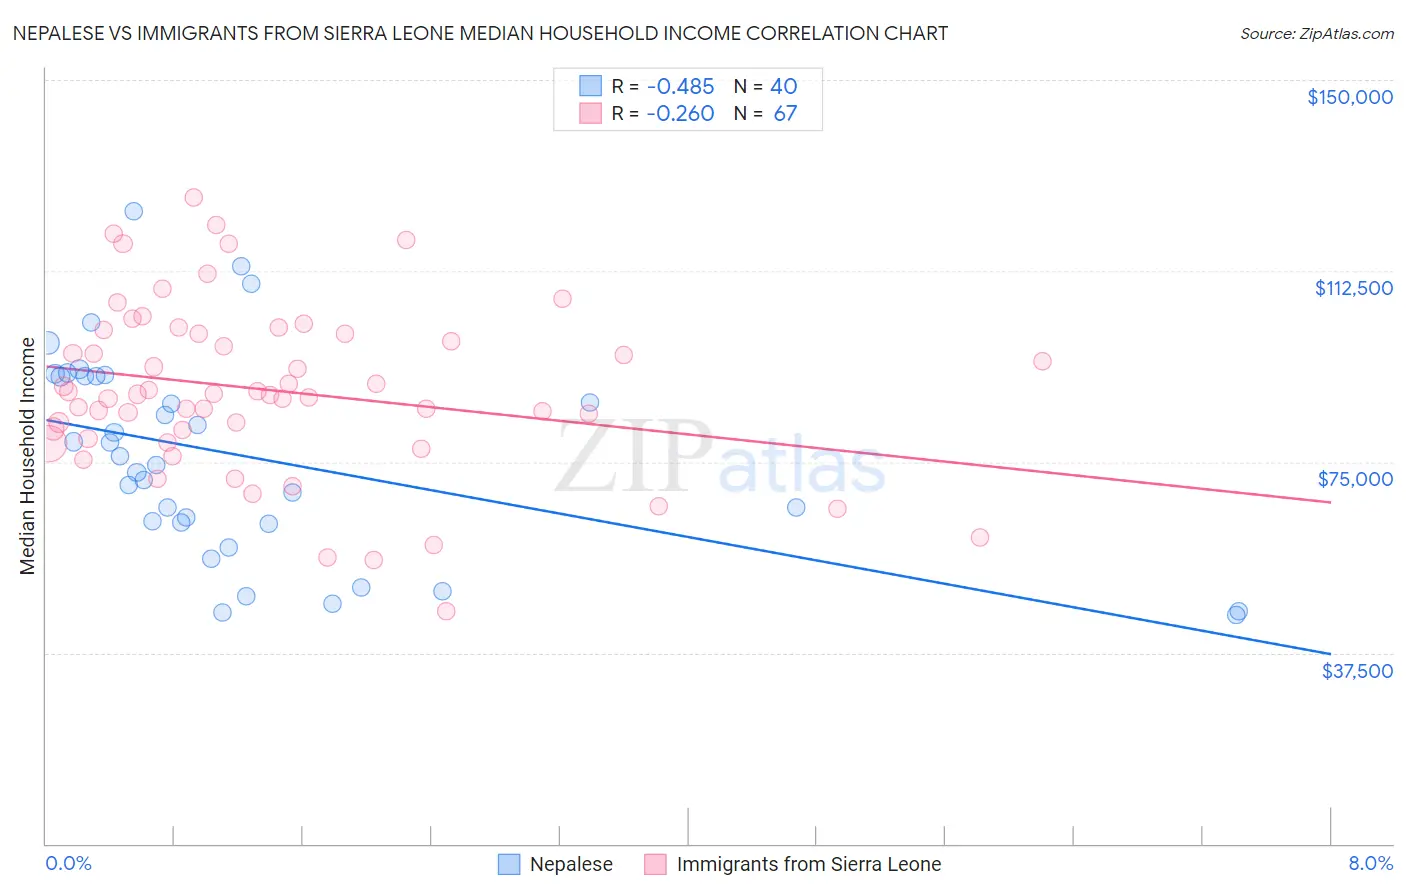 Nepalese vs Immigrants from Sierra Leone Median Household Income